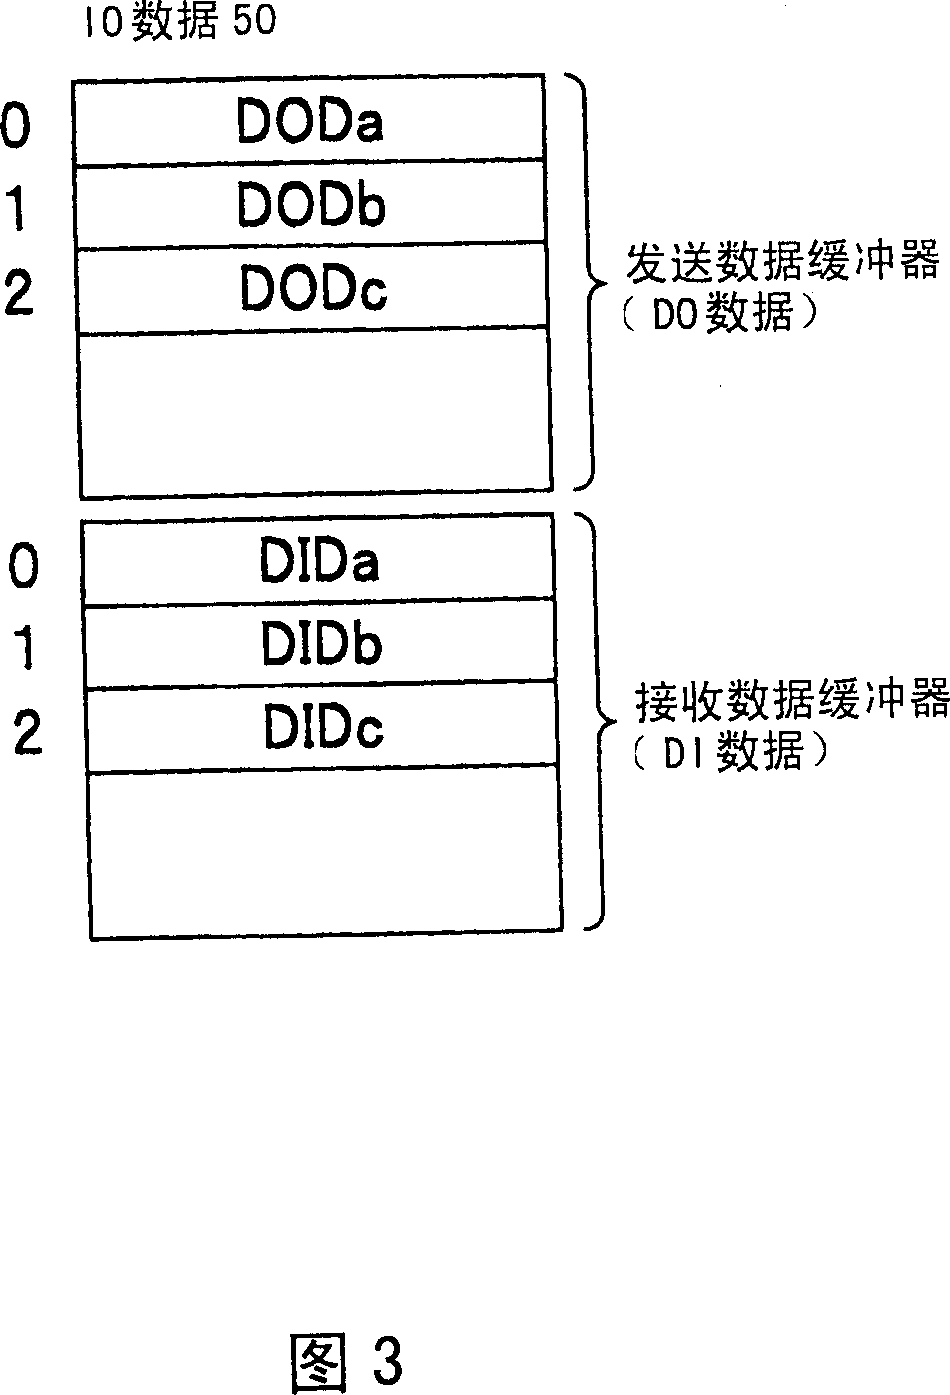 Control system and device